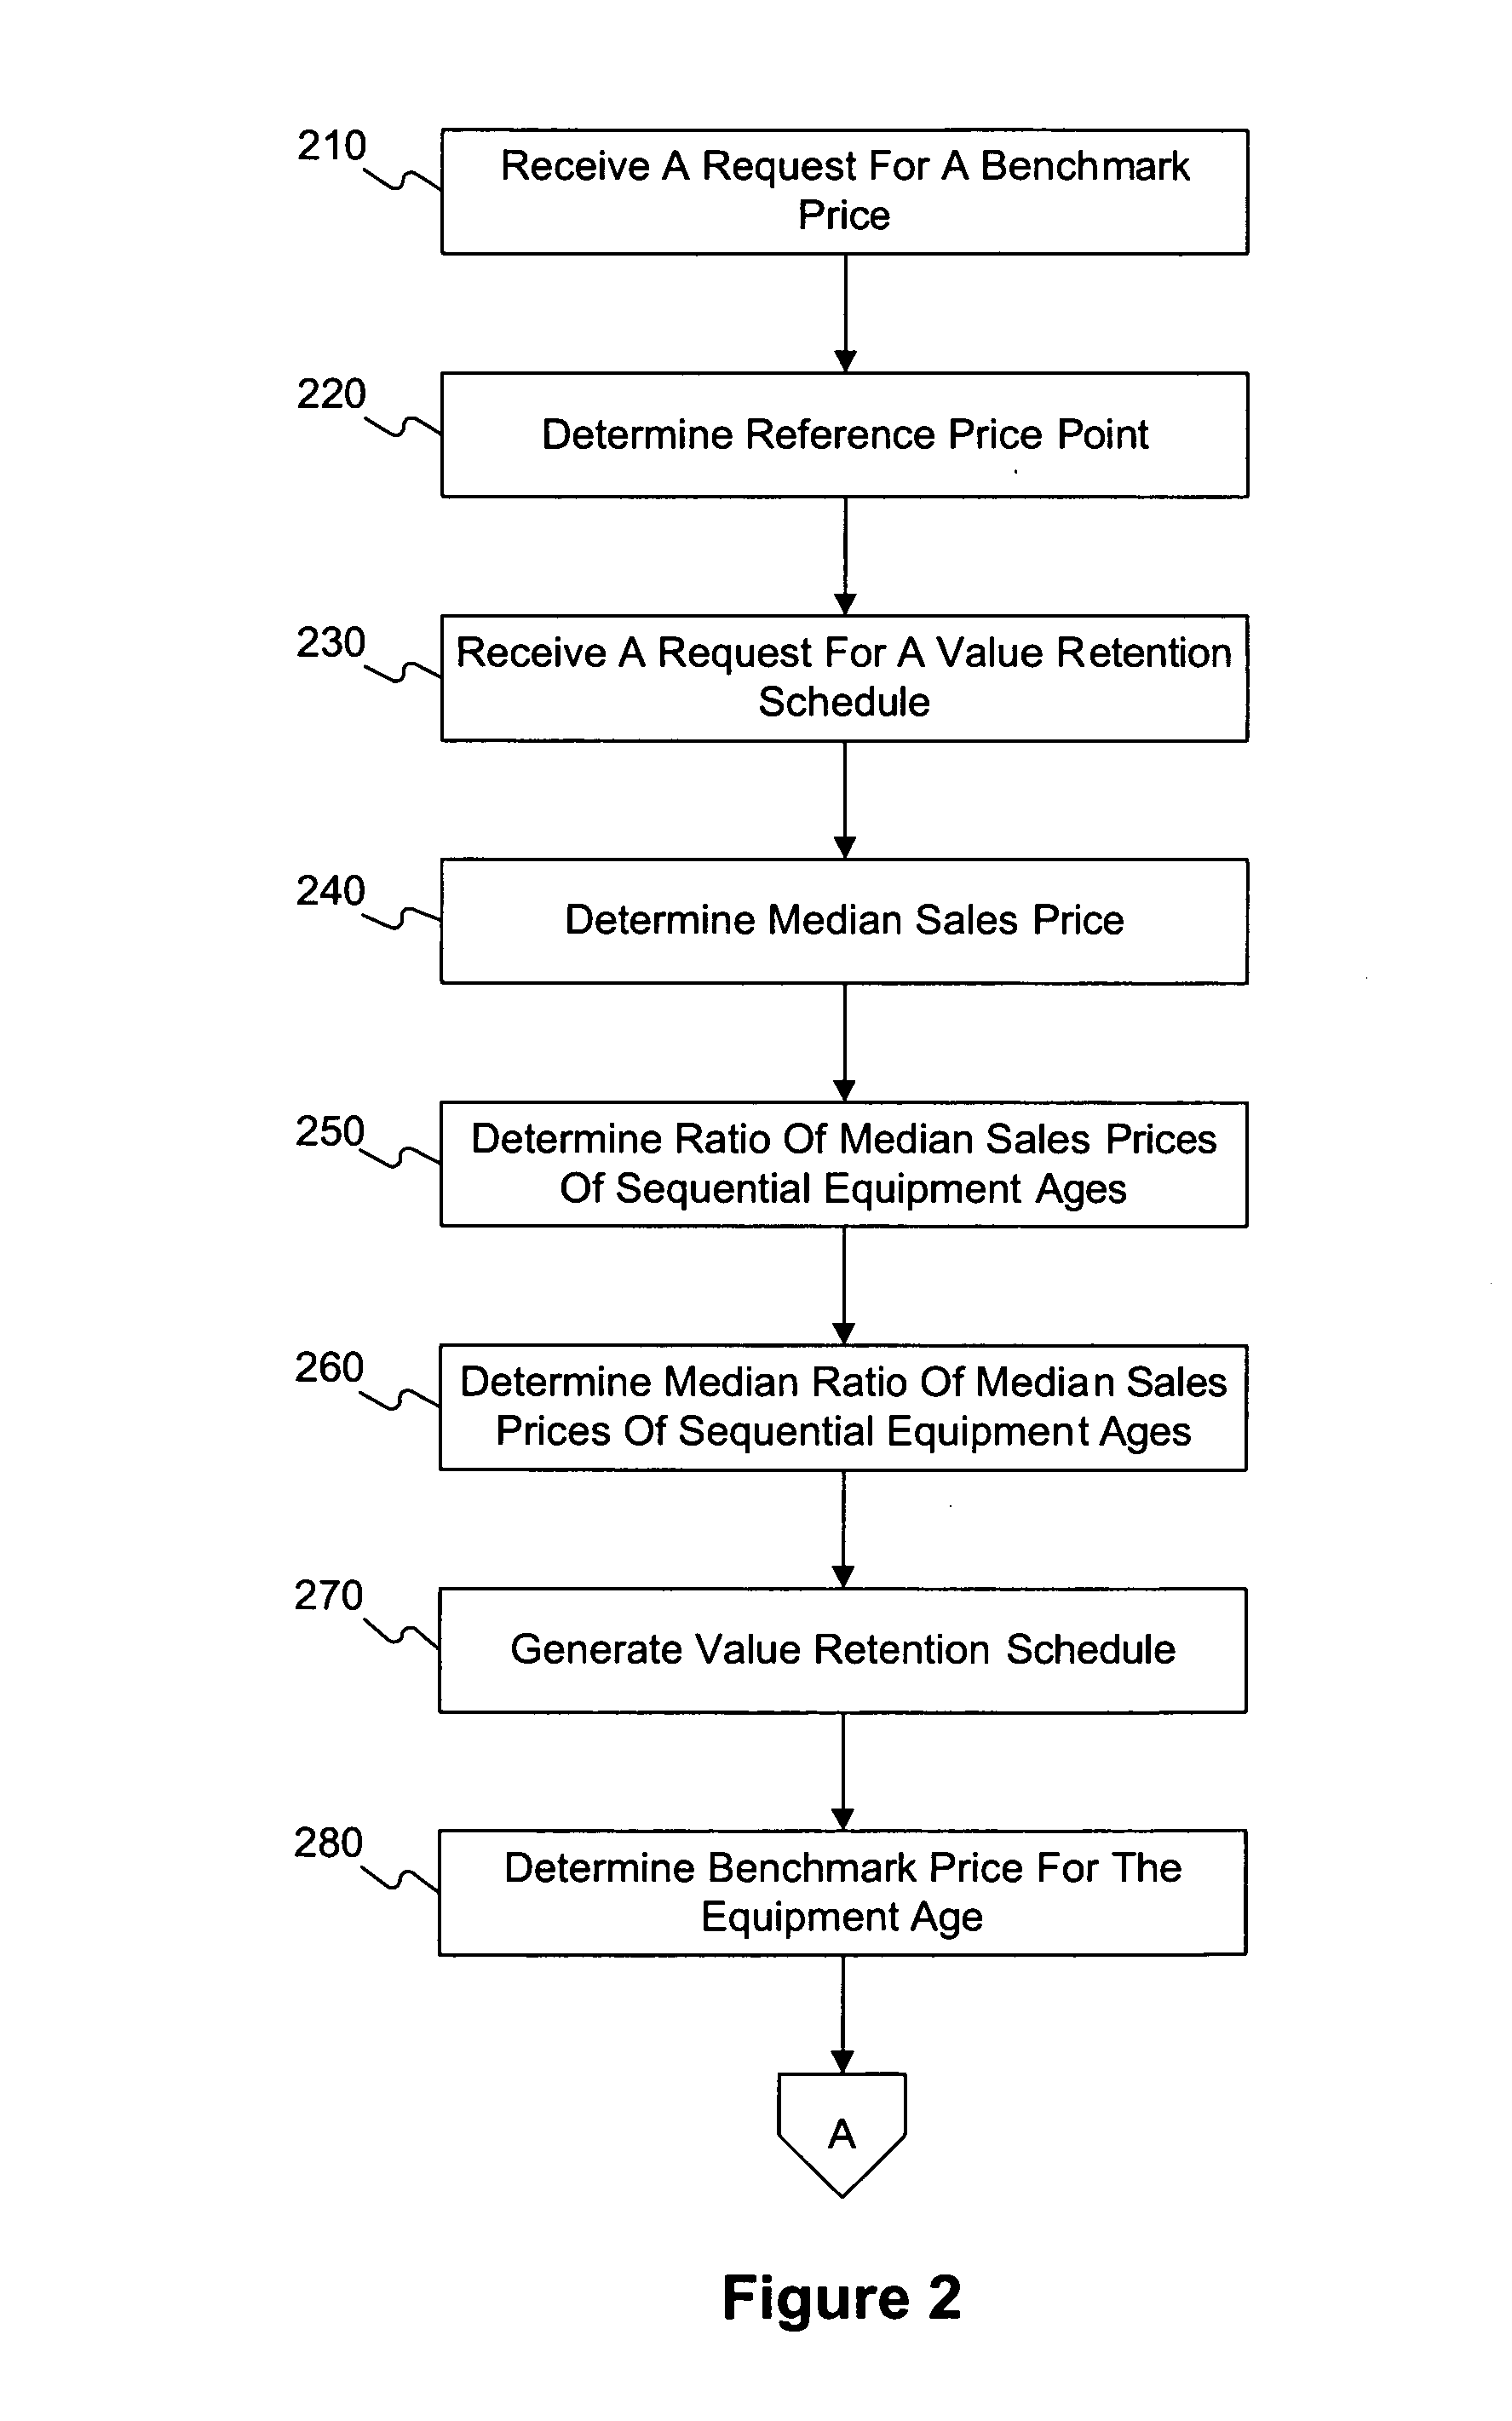 Systems and methods for determining a benchmark price